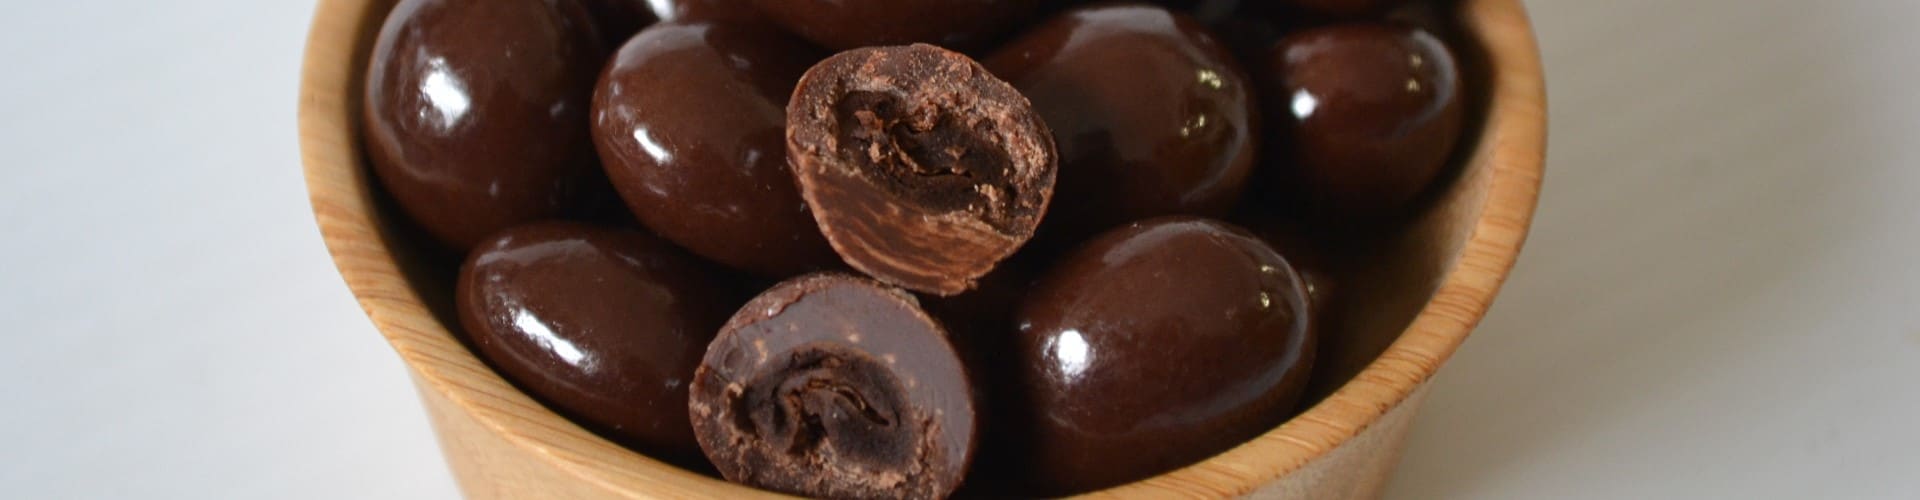 12 Best ChocolateCovered Coffee Beans Reviewed in Detail